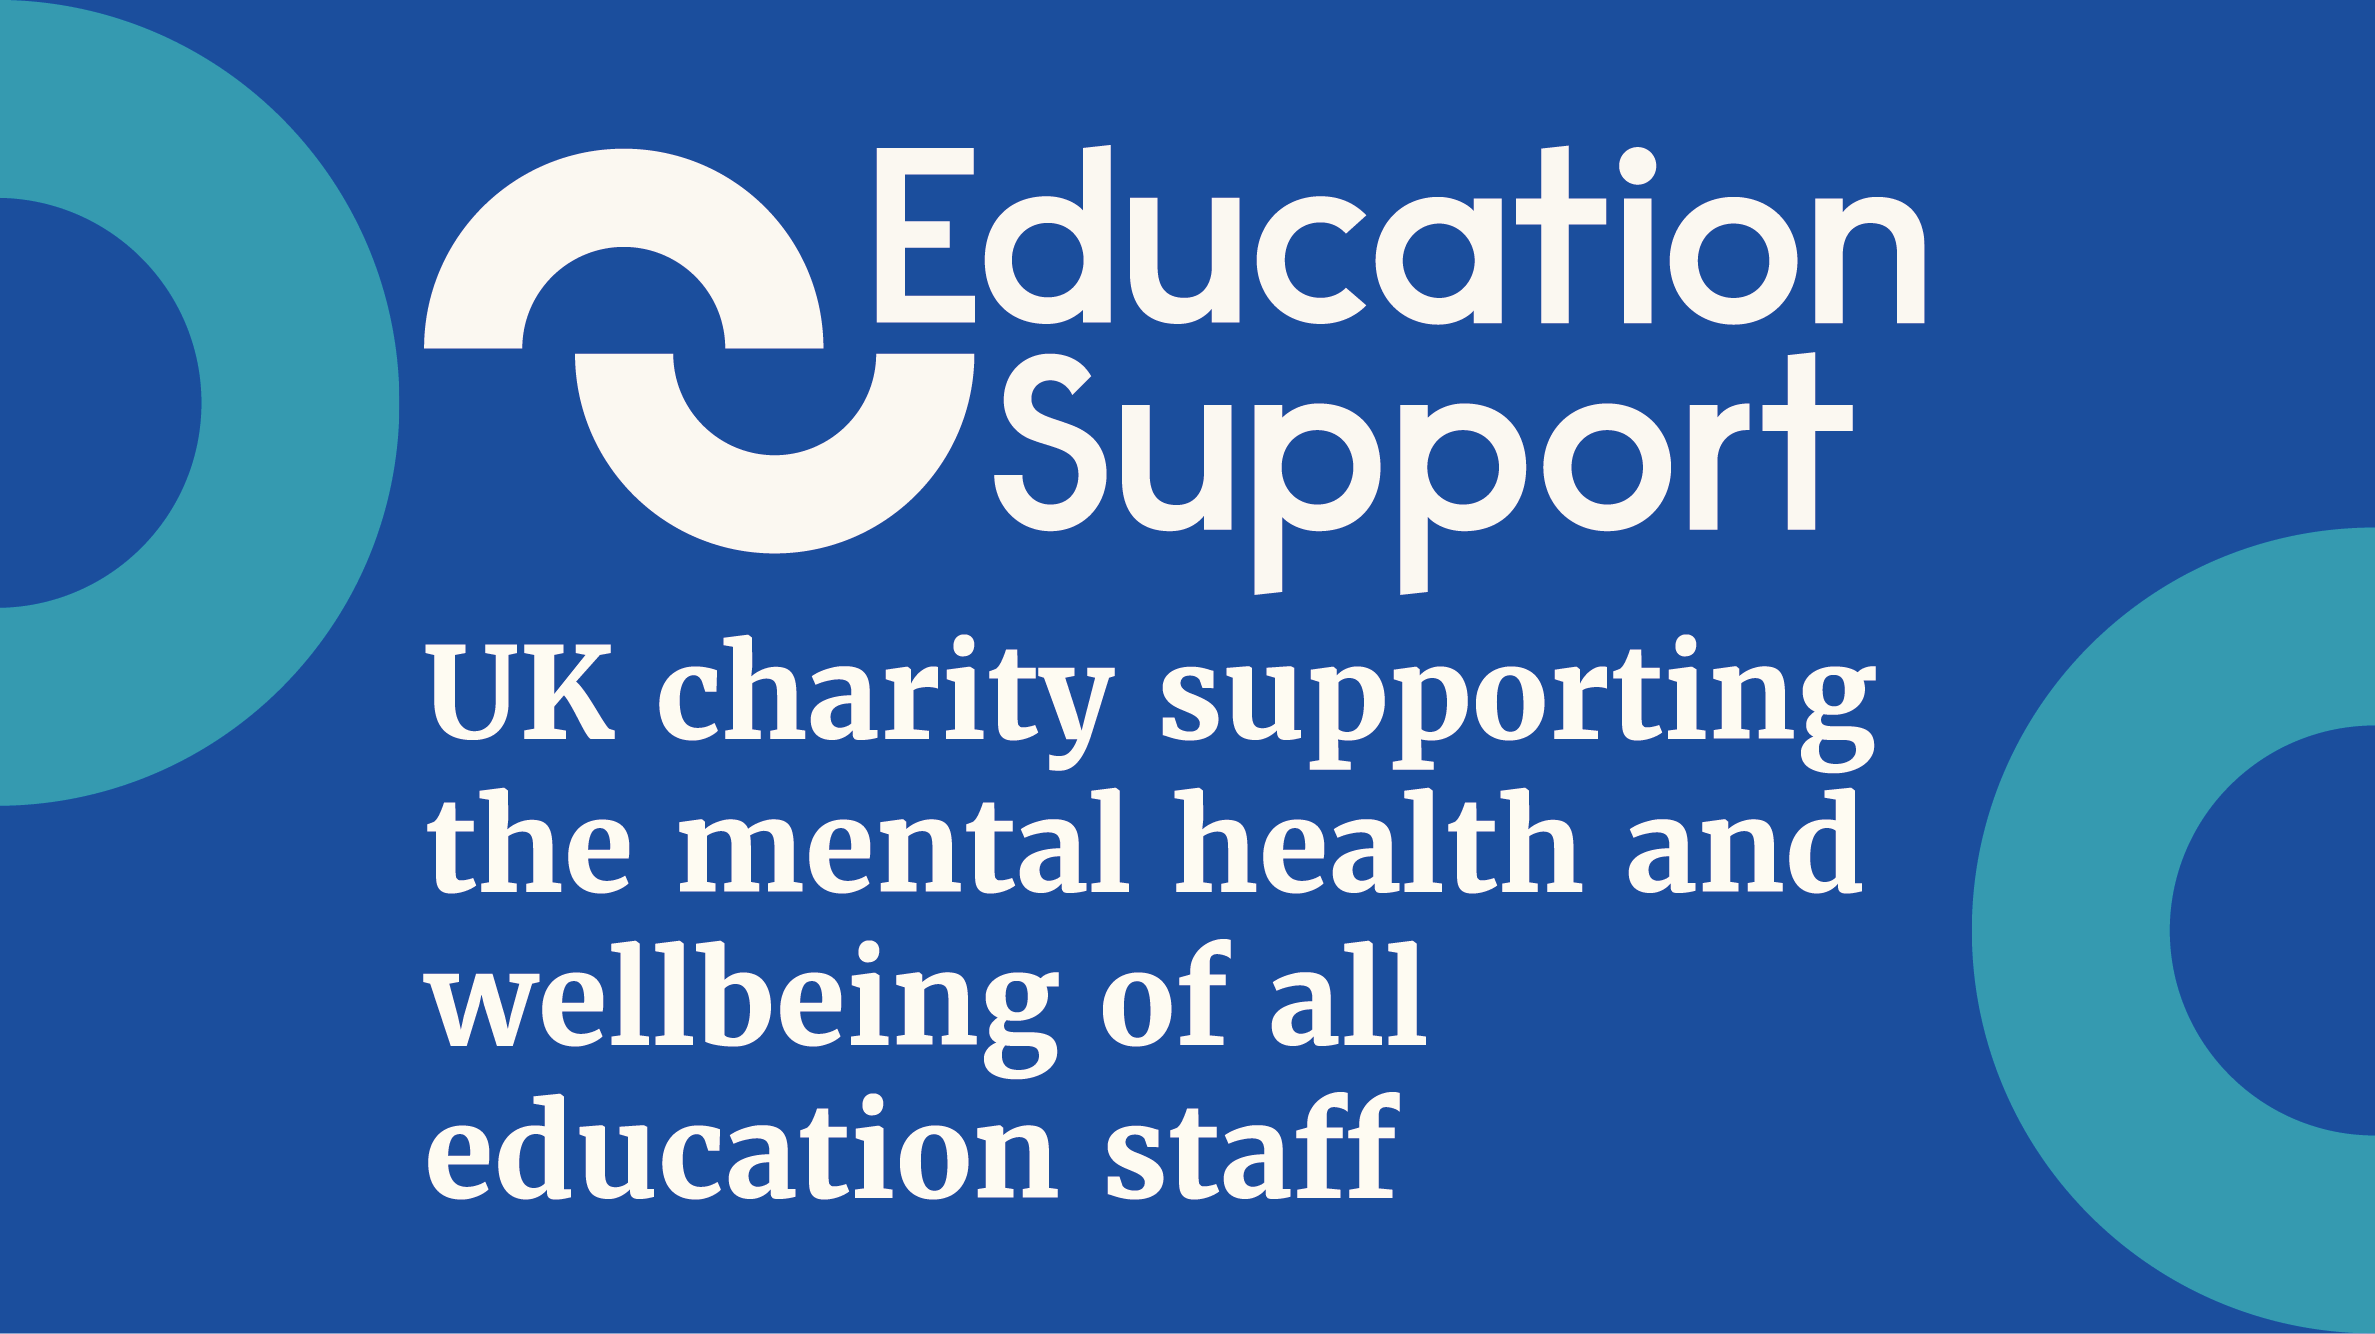 Education Support - UK charity supporting the mental health and wellbeing of all education staff